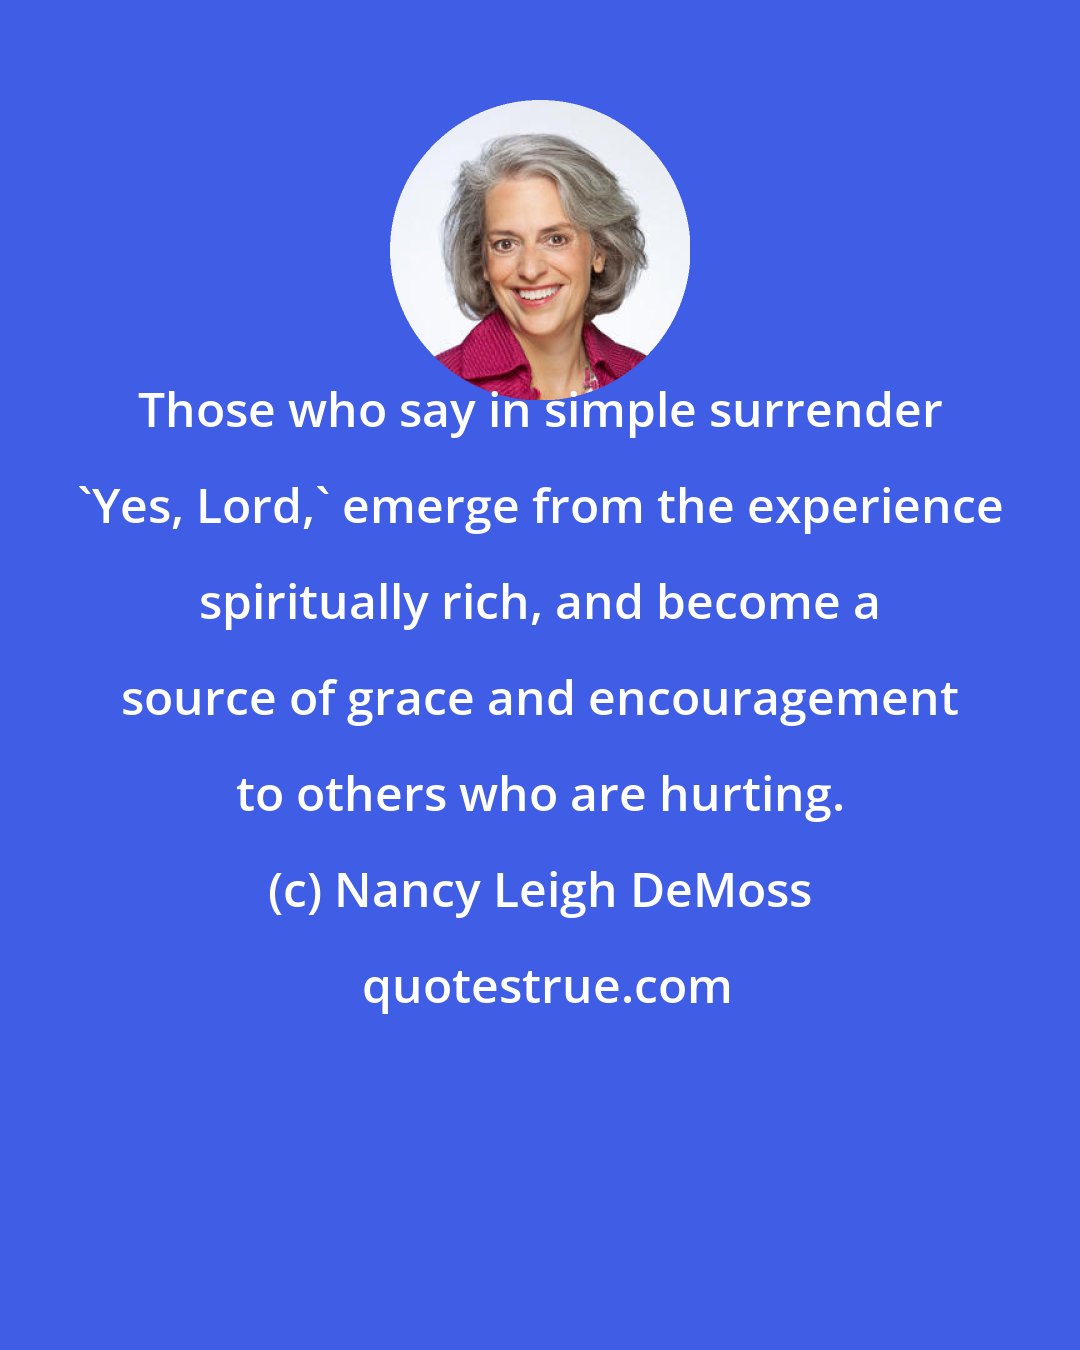 Nancy Leigh DeMoss: Those who say in simple surrender 'Yes, Lord,' emerge from the experience spiritually rich, and become a source of grace and encouragement to others who are hurting.